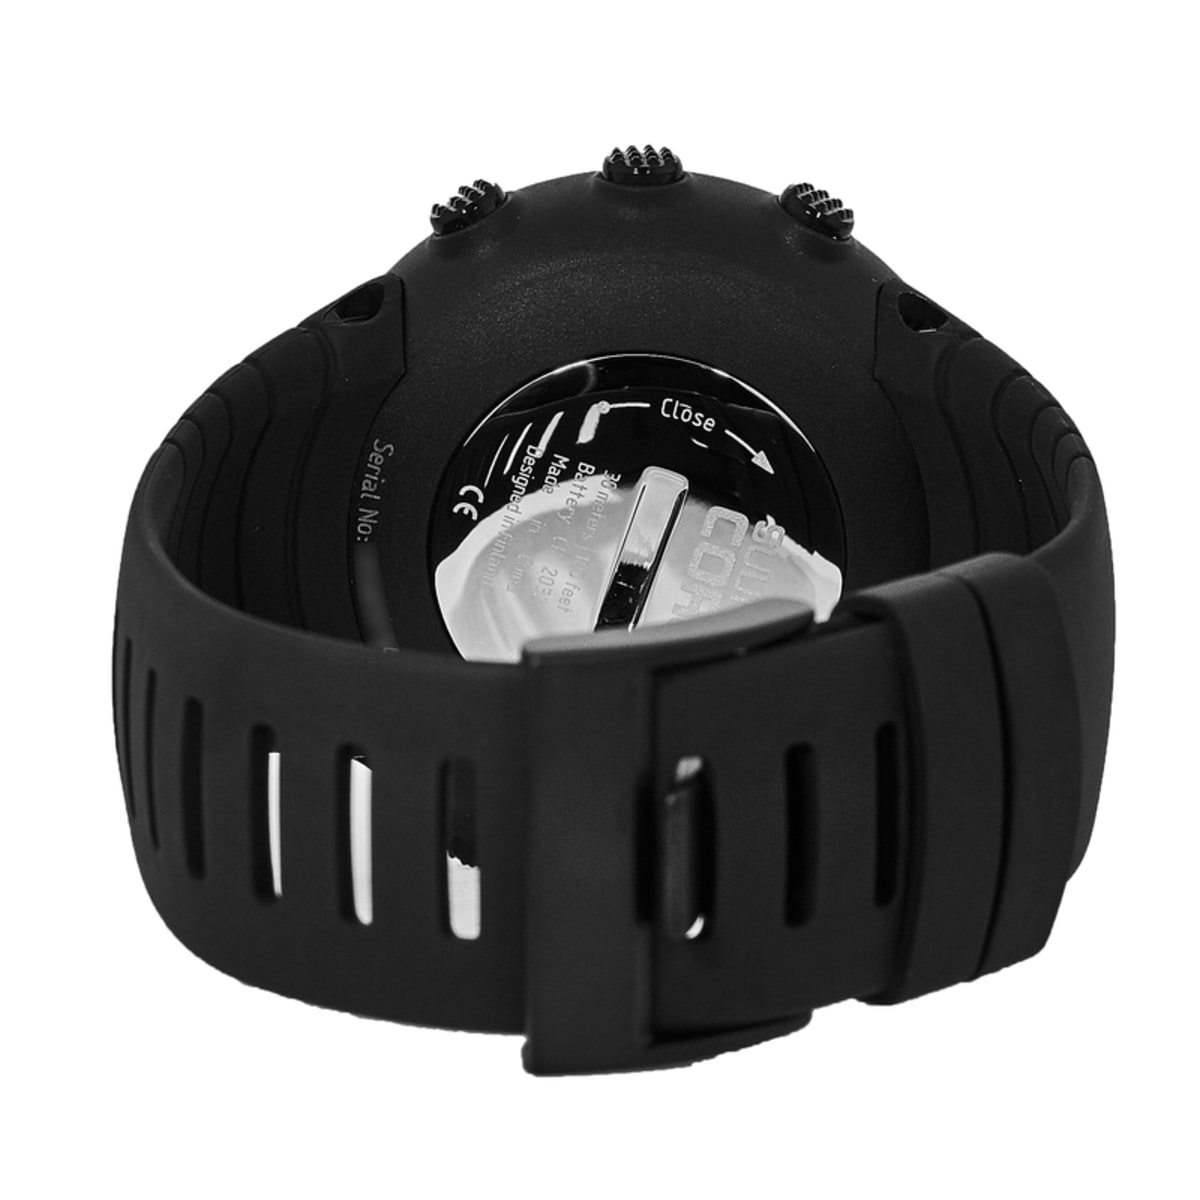 Suunto Core All Black Military Outdoor Sports Unisex Watch SS014279010